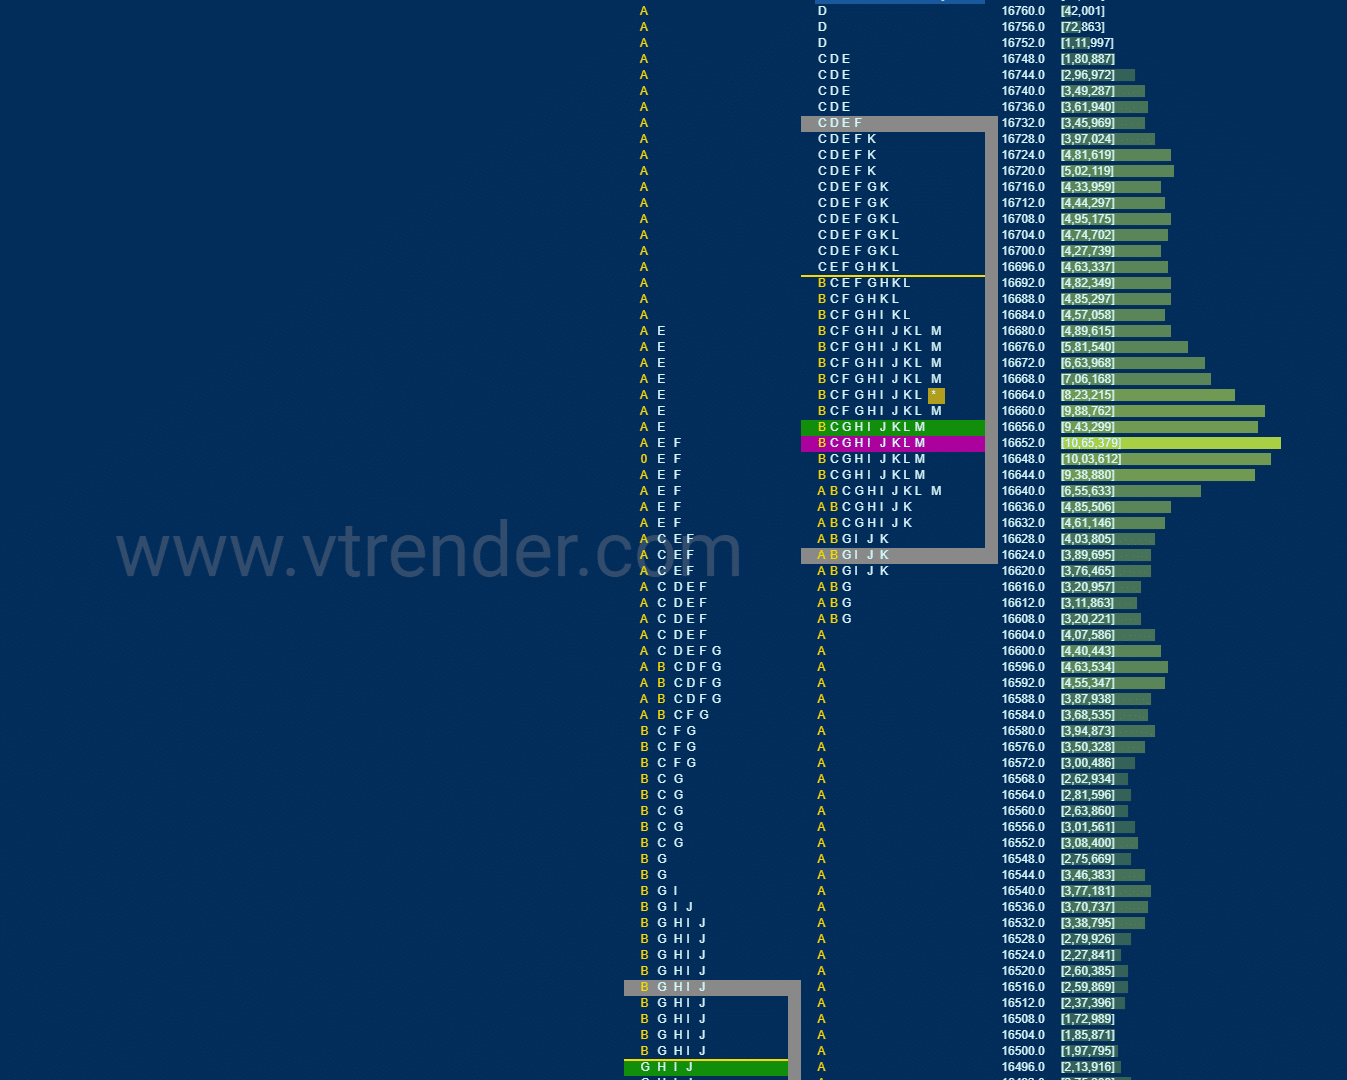 Nf 18 Market Profile Analysis Dated 25Th February 2022 Banknifty Futures, Charts, Day Trading, Intraday Trading, Intraday Trading Strategies, Market Profile, Market Profile Trading Strategies, Nifty Futures, Order Flow Analysis, Support And Resistance, Technical Analysis, Trading Strategies, Volume Profile Trading